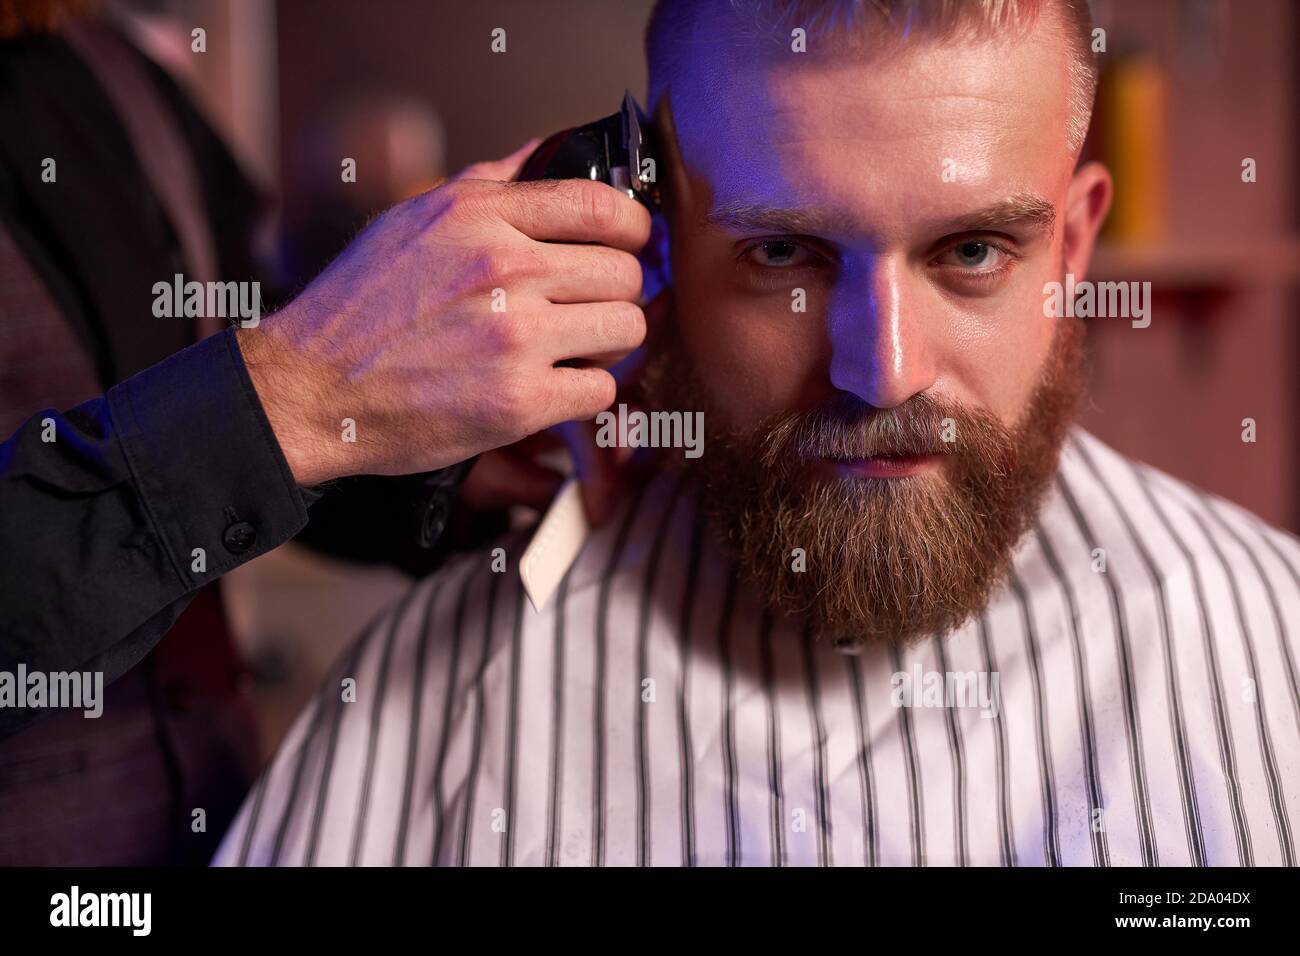 confident caucasian barber mster cuts hair and beard of men in the ...